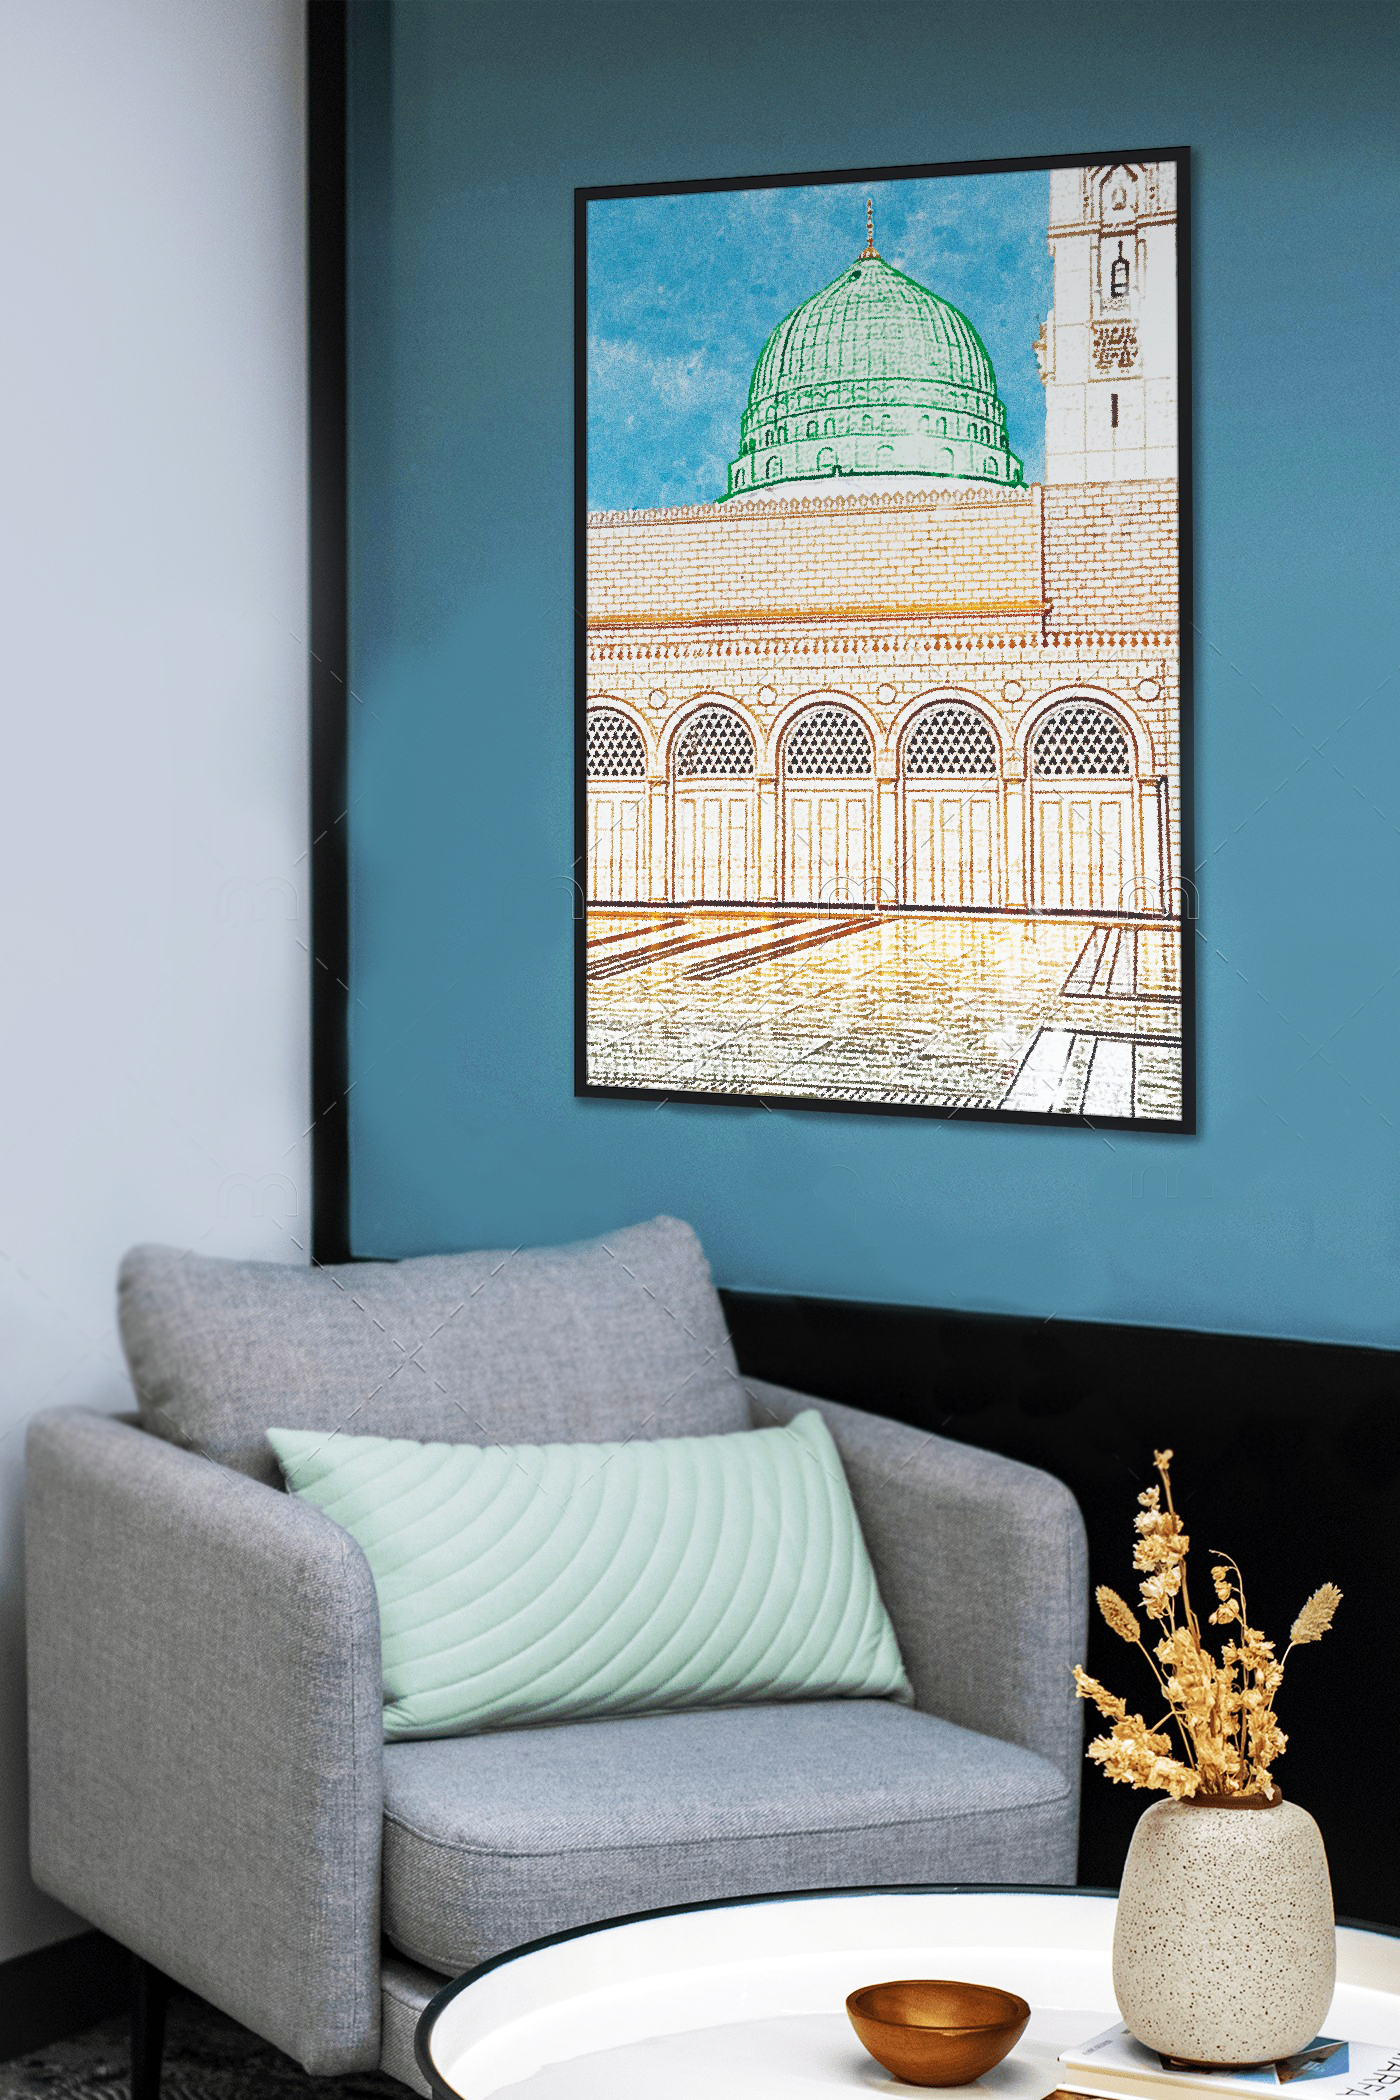 Islamic Wall Decoration For Your Home & Office_2